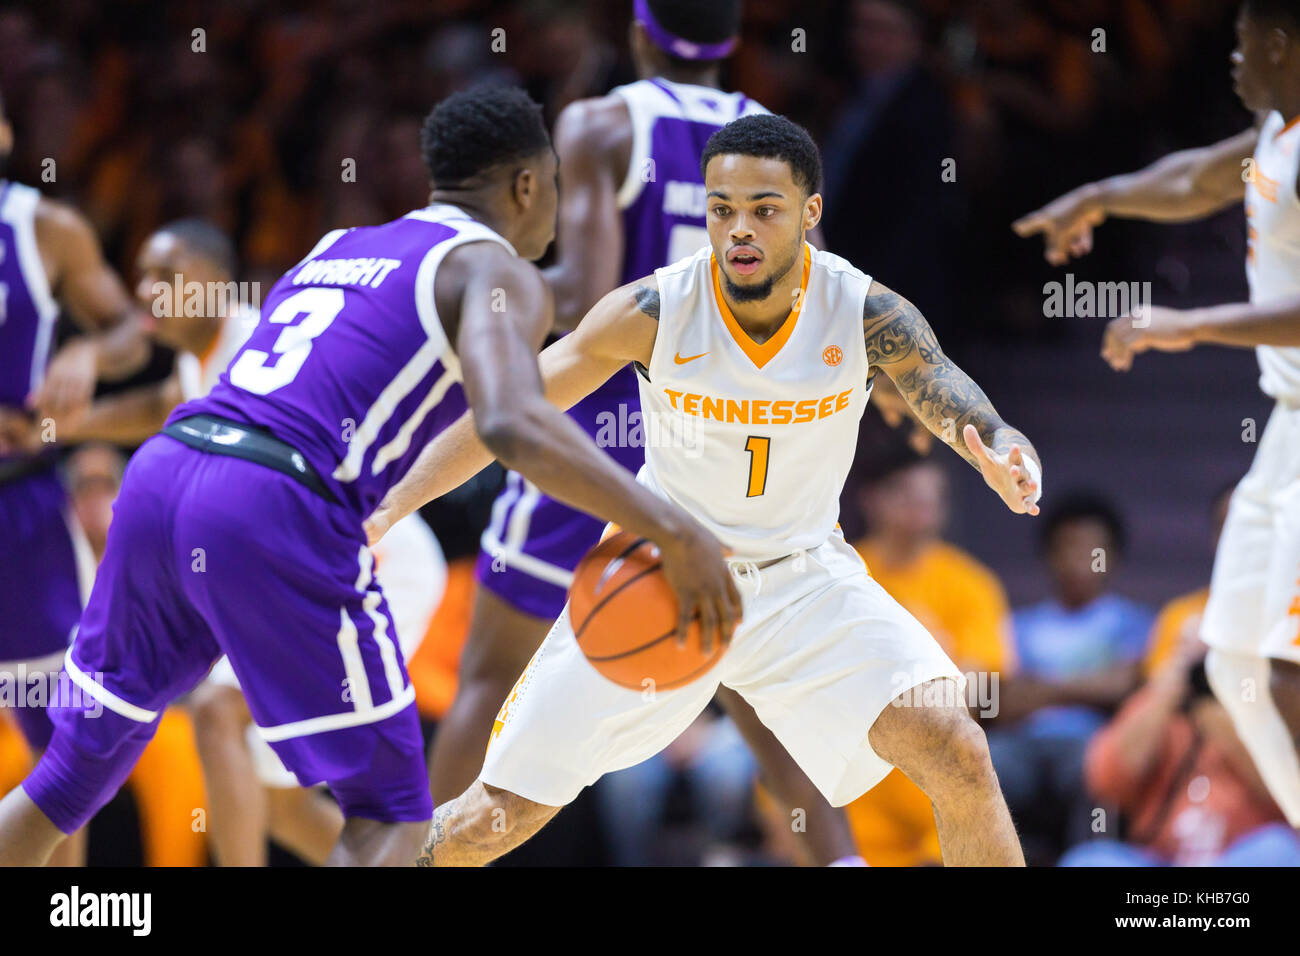 University of Tennessee, Tennessee November 14, 2017: Lamonte Turner #1 of the Tennessee Volunteers defends against Jamal Wright #3 of the High Point Panthers during the NCAA basketball game between the University of Tennessee Volunteers and the High Point University Panthers at Thompson Boling Arena in Knoxville TN Tim Gangloff/CSM Stock Photo